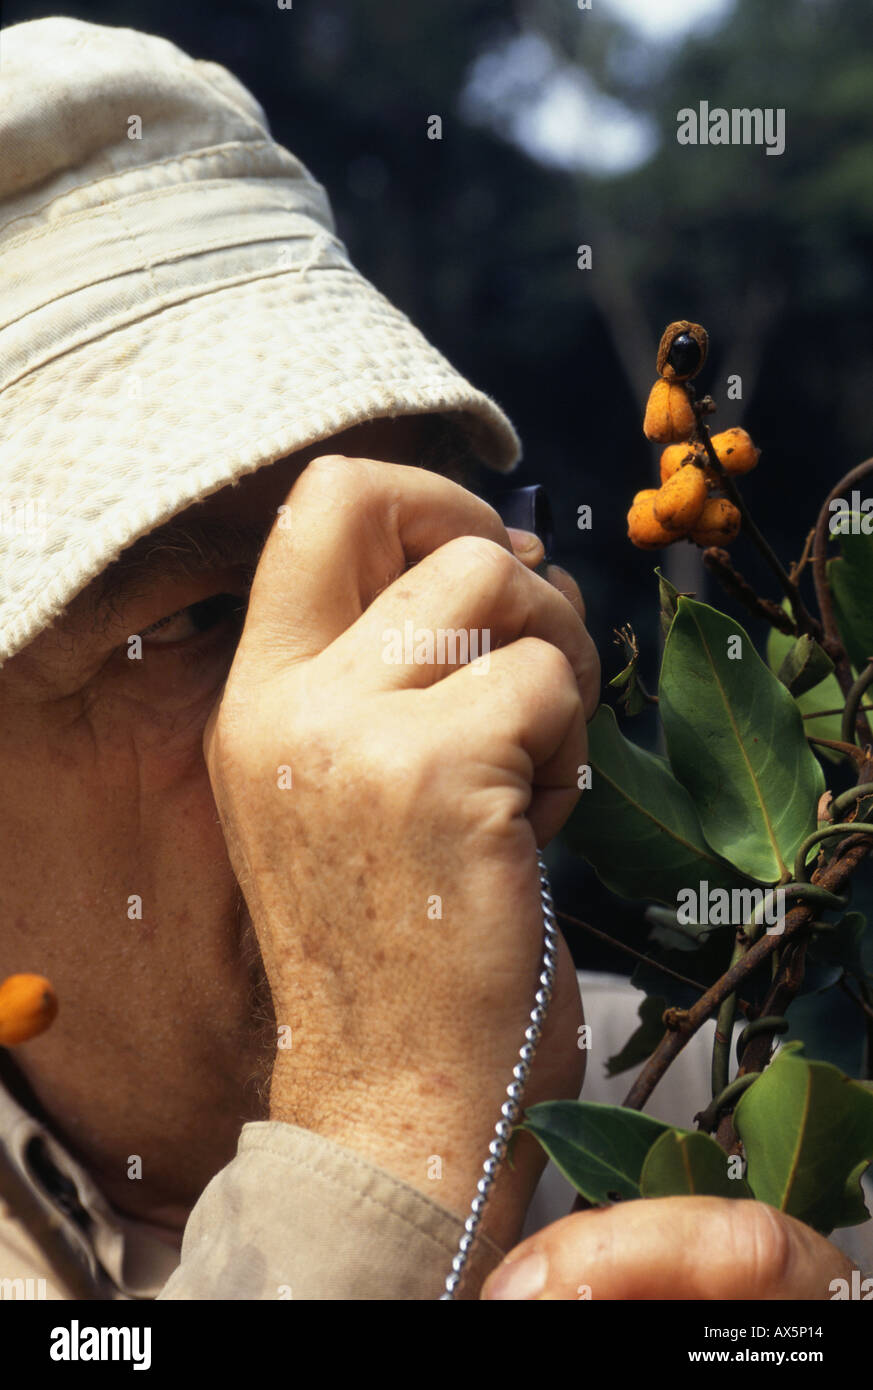 Makande, Gabon. Frans Breteler with Agelaea sp., a plant with fruits previously only known by its flowers. Stock Photo